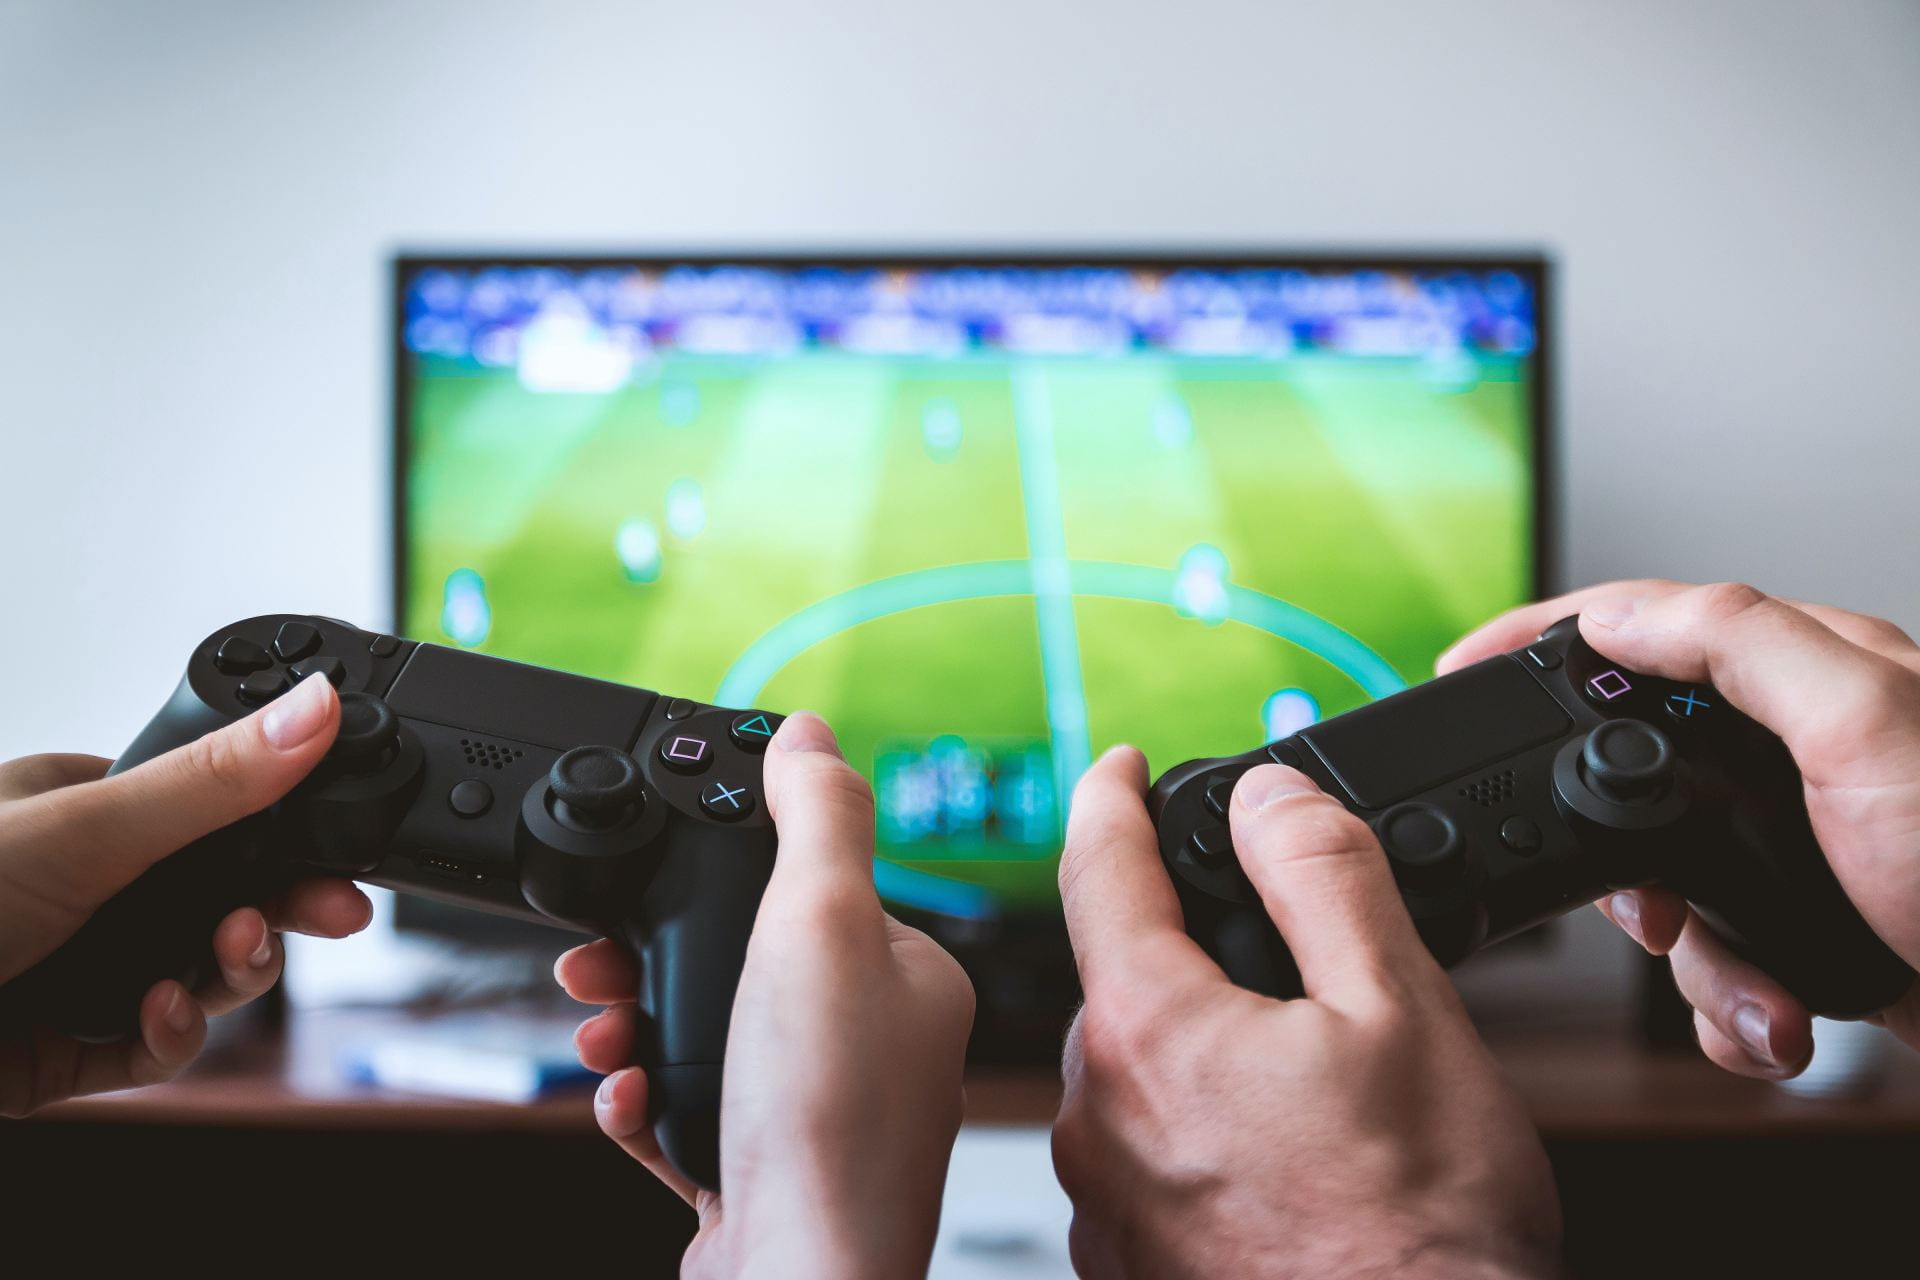 Two pairs of hands holding Playstation remotes. In the background there is a TV out-of-focus with a football game displayed.